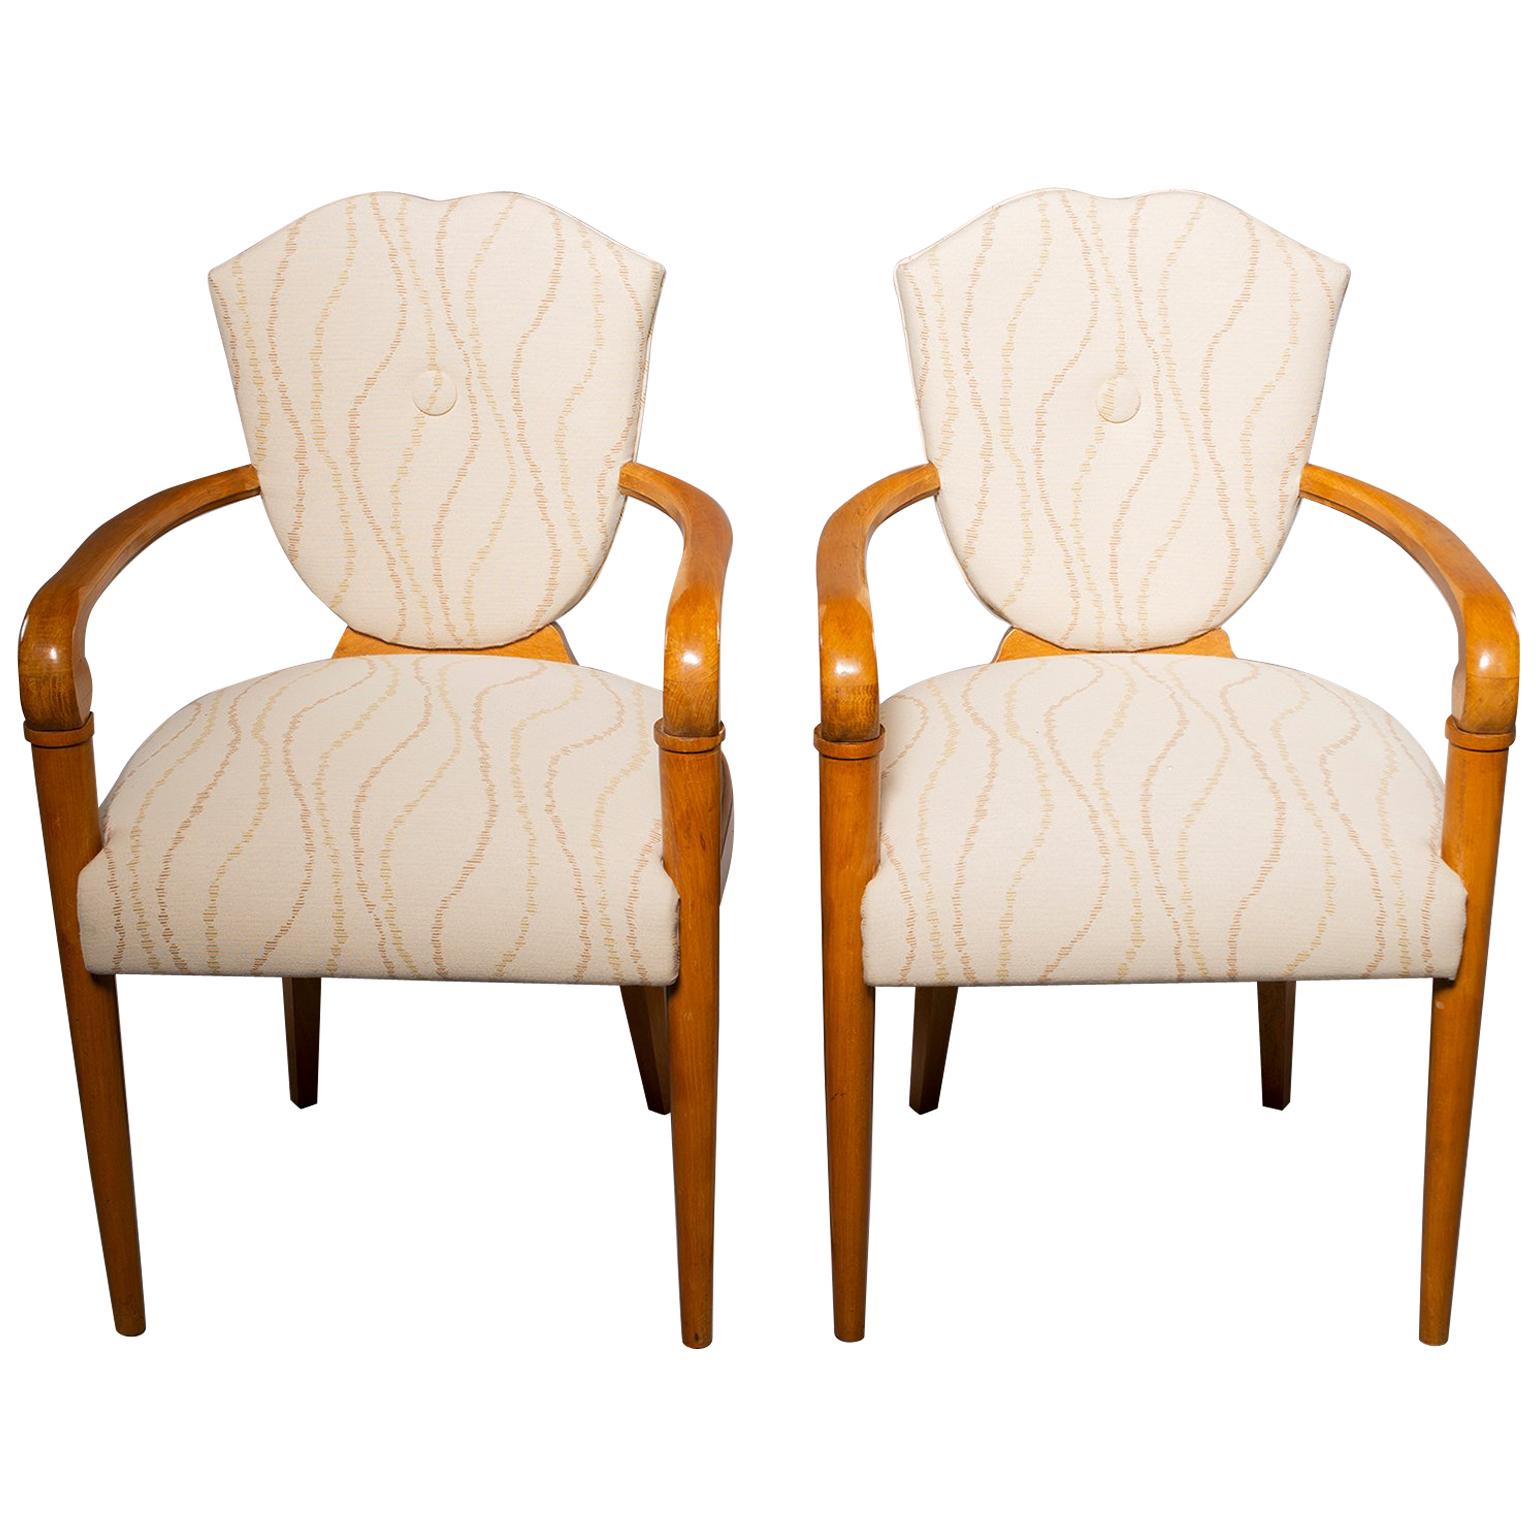 Pair of French Bridge Chairs with Beech Frames and New Upholstery